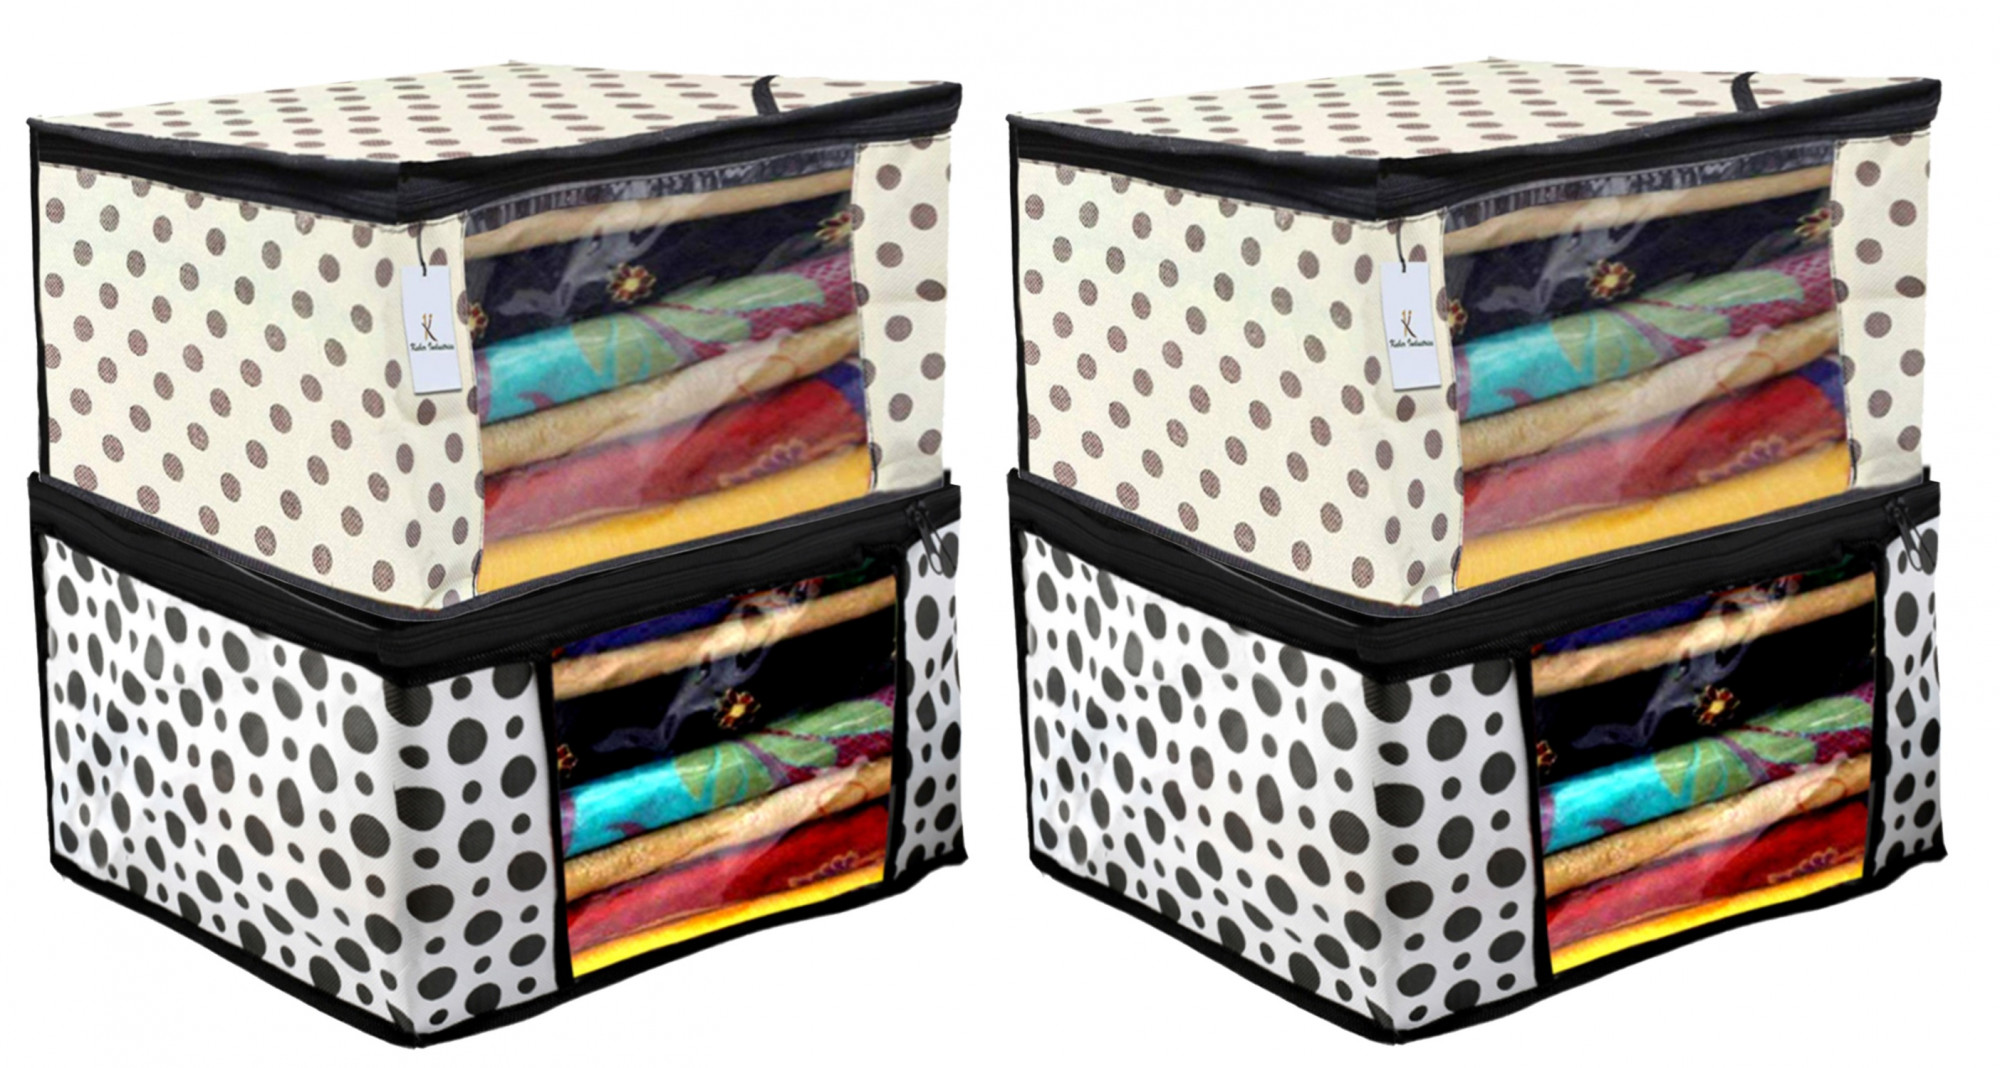 Kuber Industries Polka Dot Design Non Woven Fabric Saree Cover Set with Transparent Window, Extra Large, Cream & White -CTKTC40761